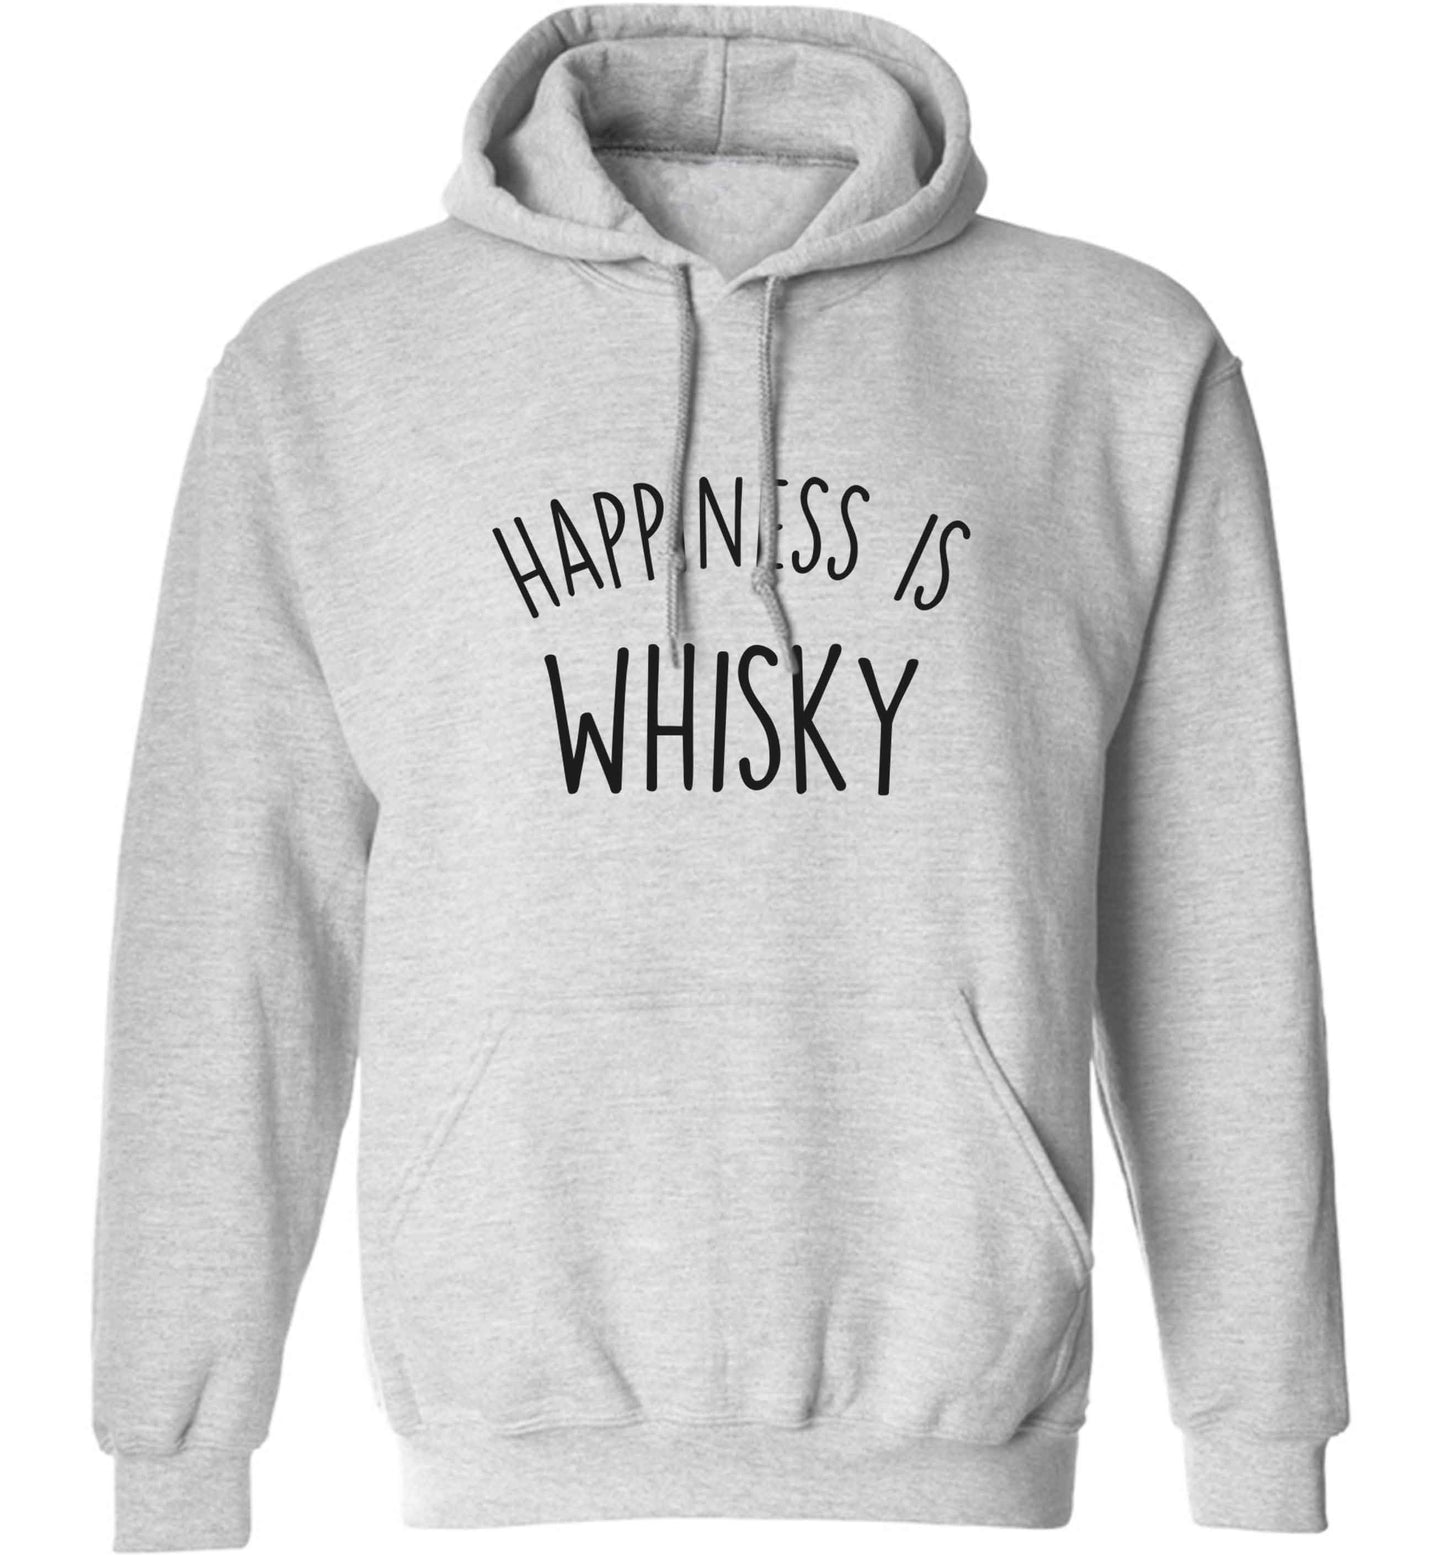 Happiness is whisky adults unisex grey hoodie 2XL